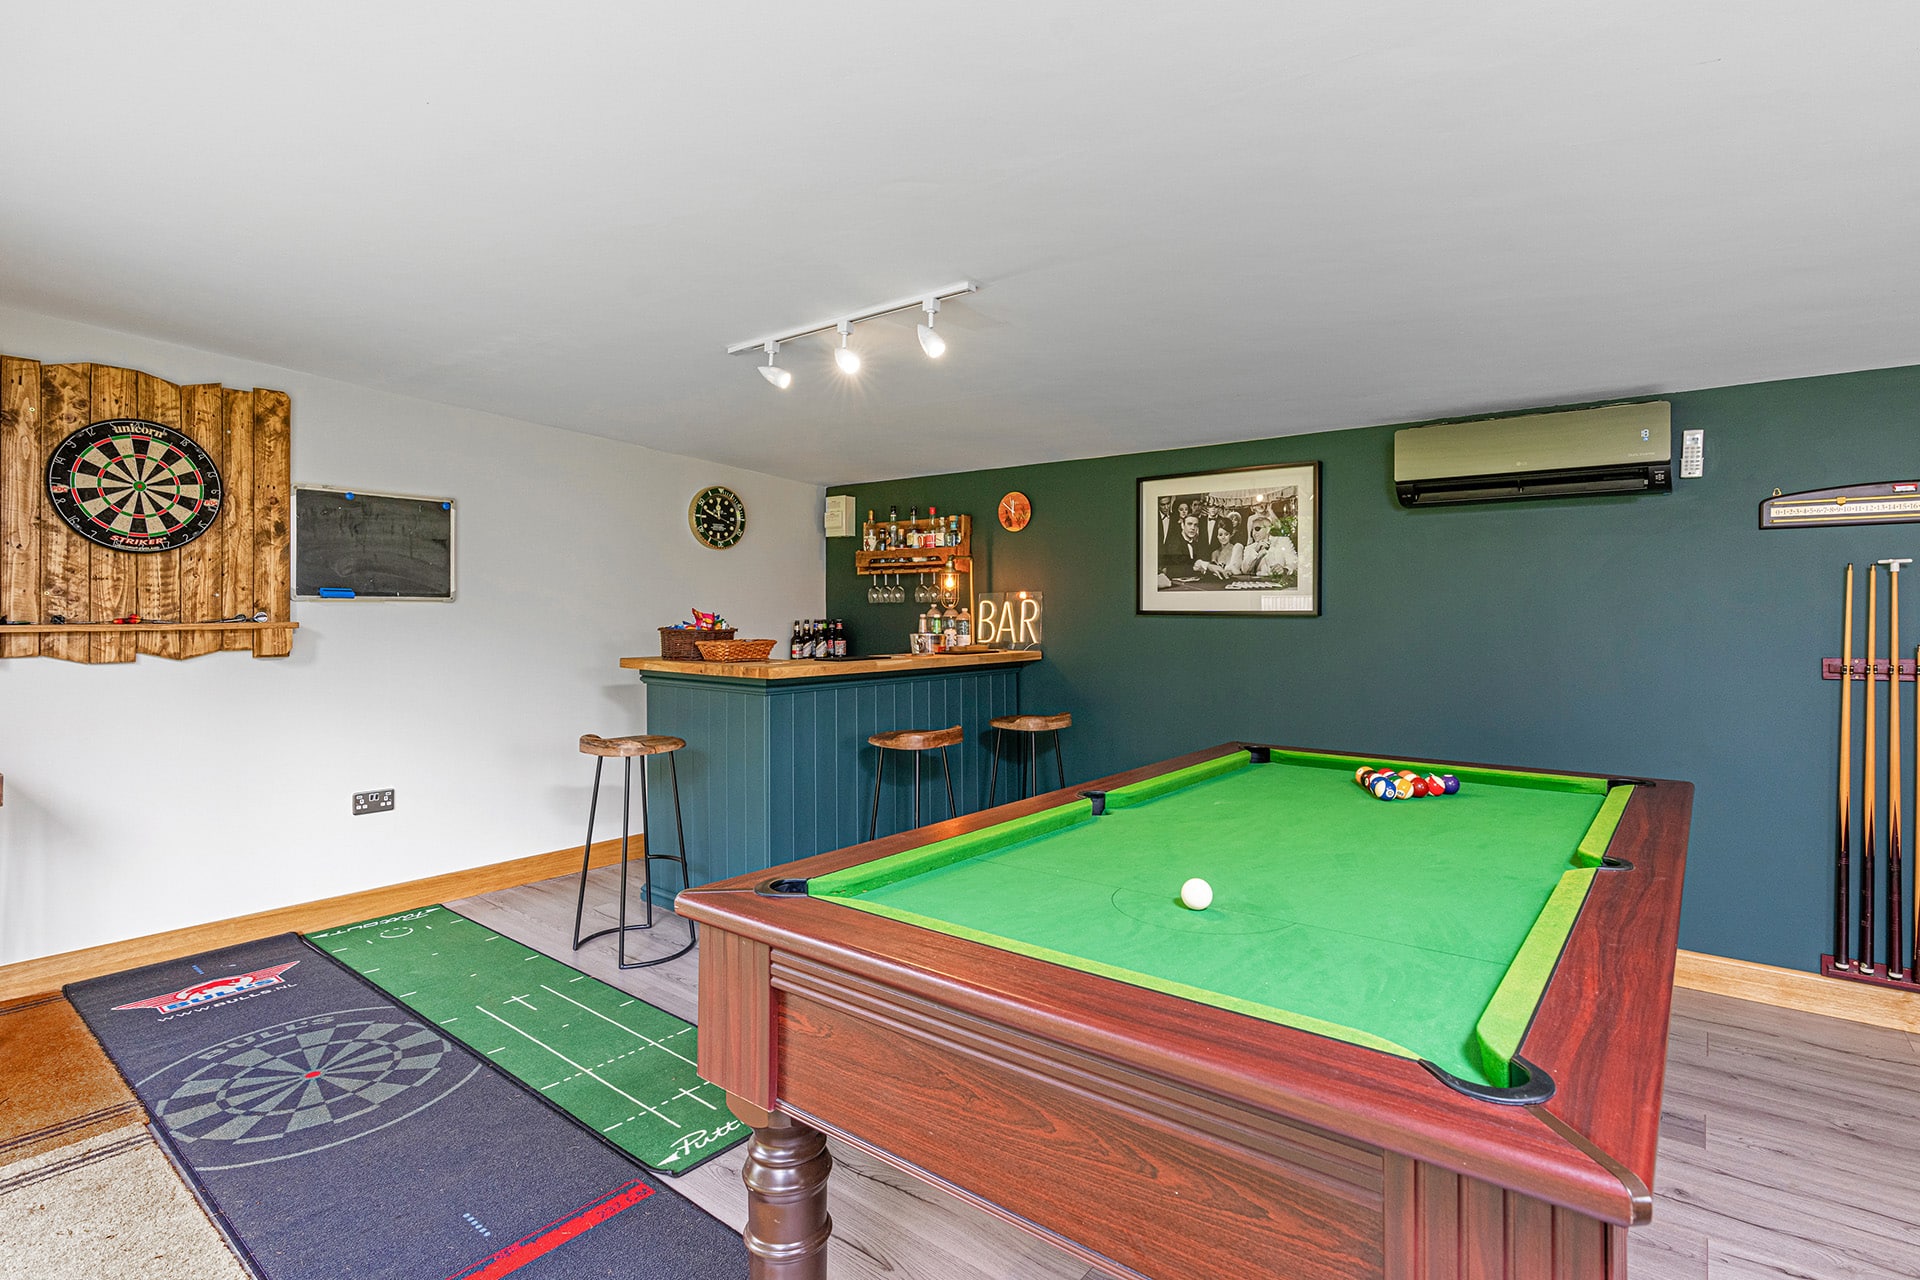 interior of a garden games room with pool table and bar with dart board